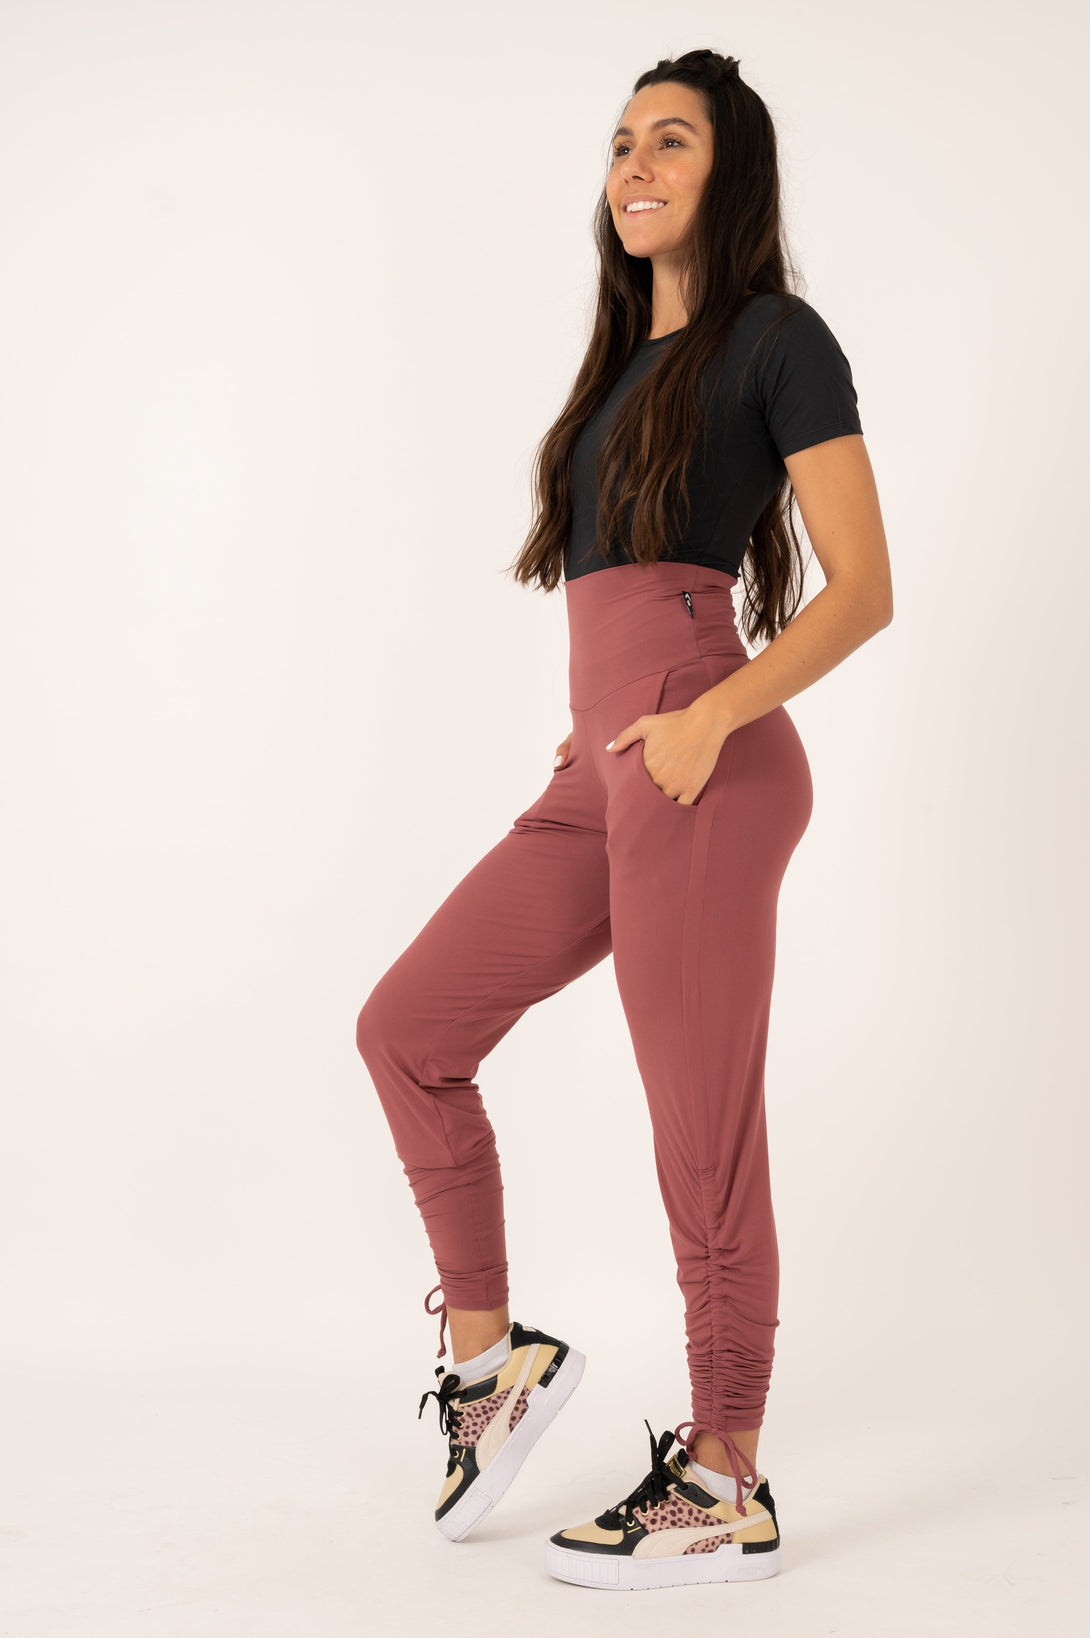 Dark Blush Soft To Touch - Jogger Long Tie Sided W/ Pockets-Activewear-Exoticathletica